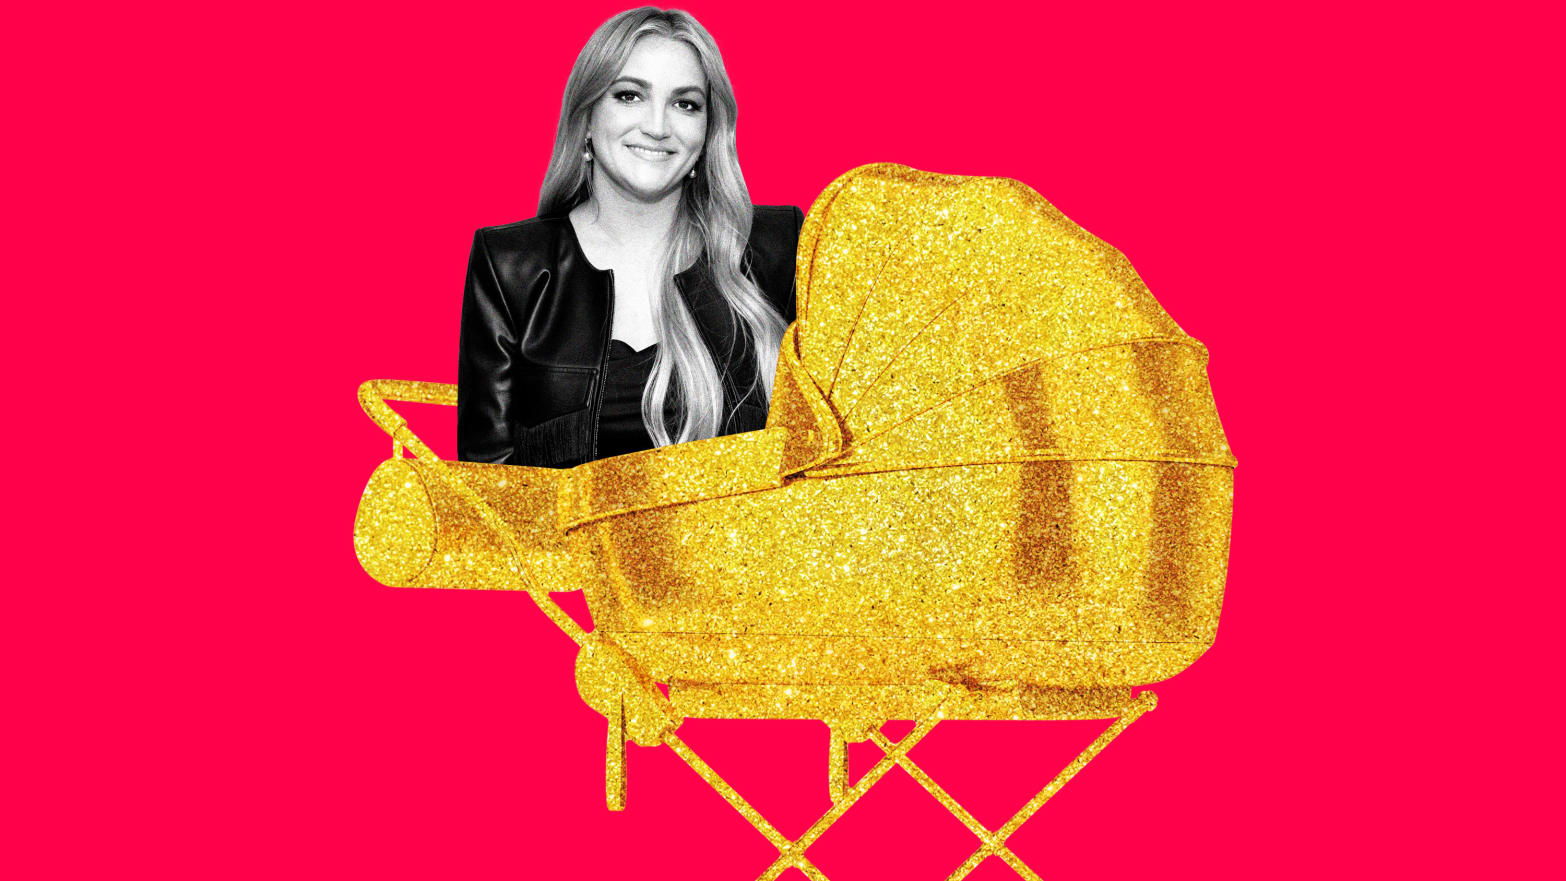 An illustration that includes a photo of Jamie Lynn Spears and a golden stroller